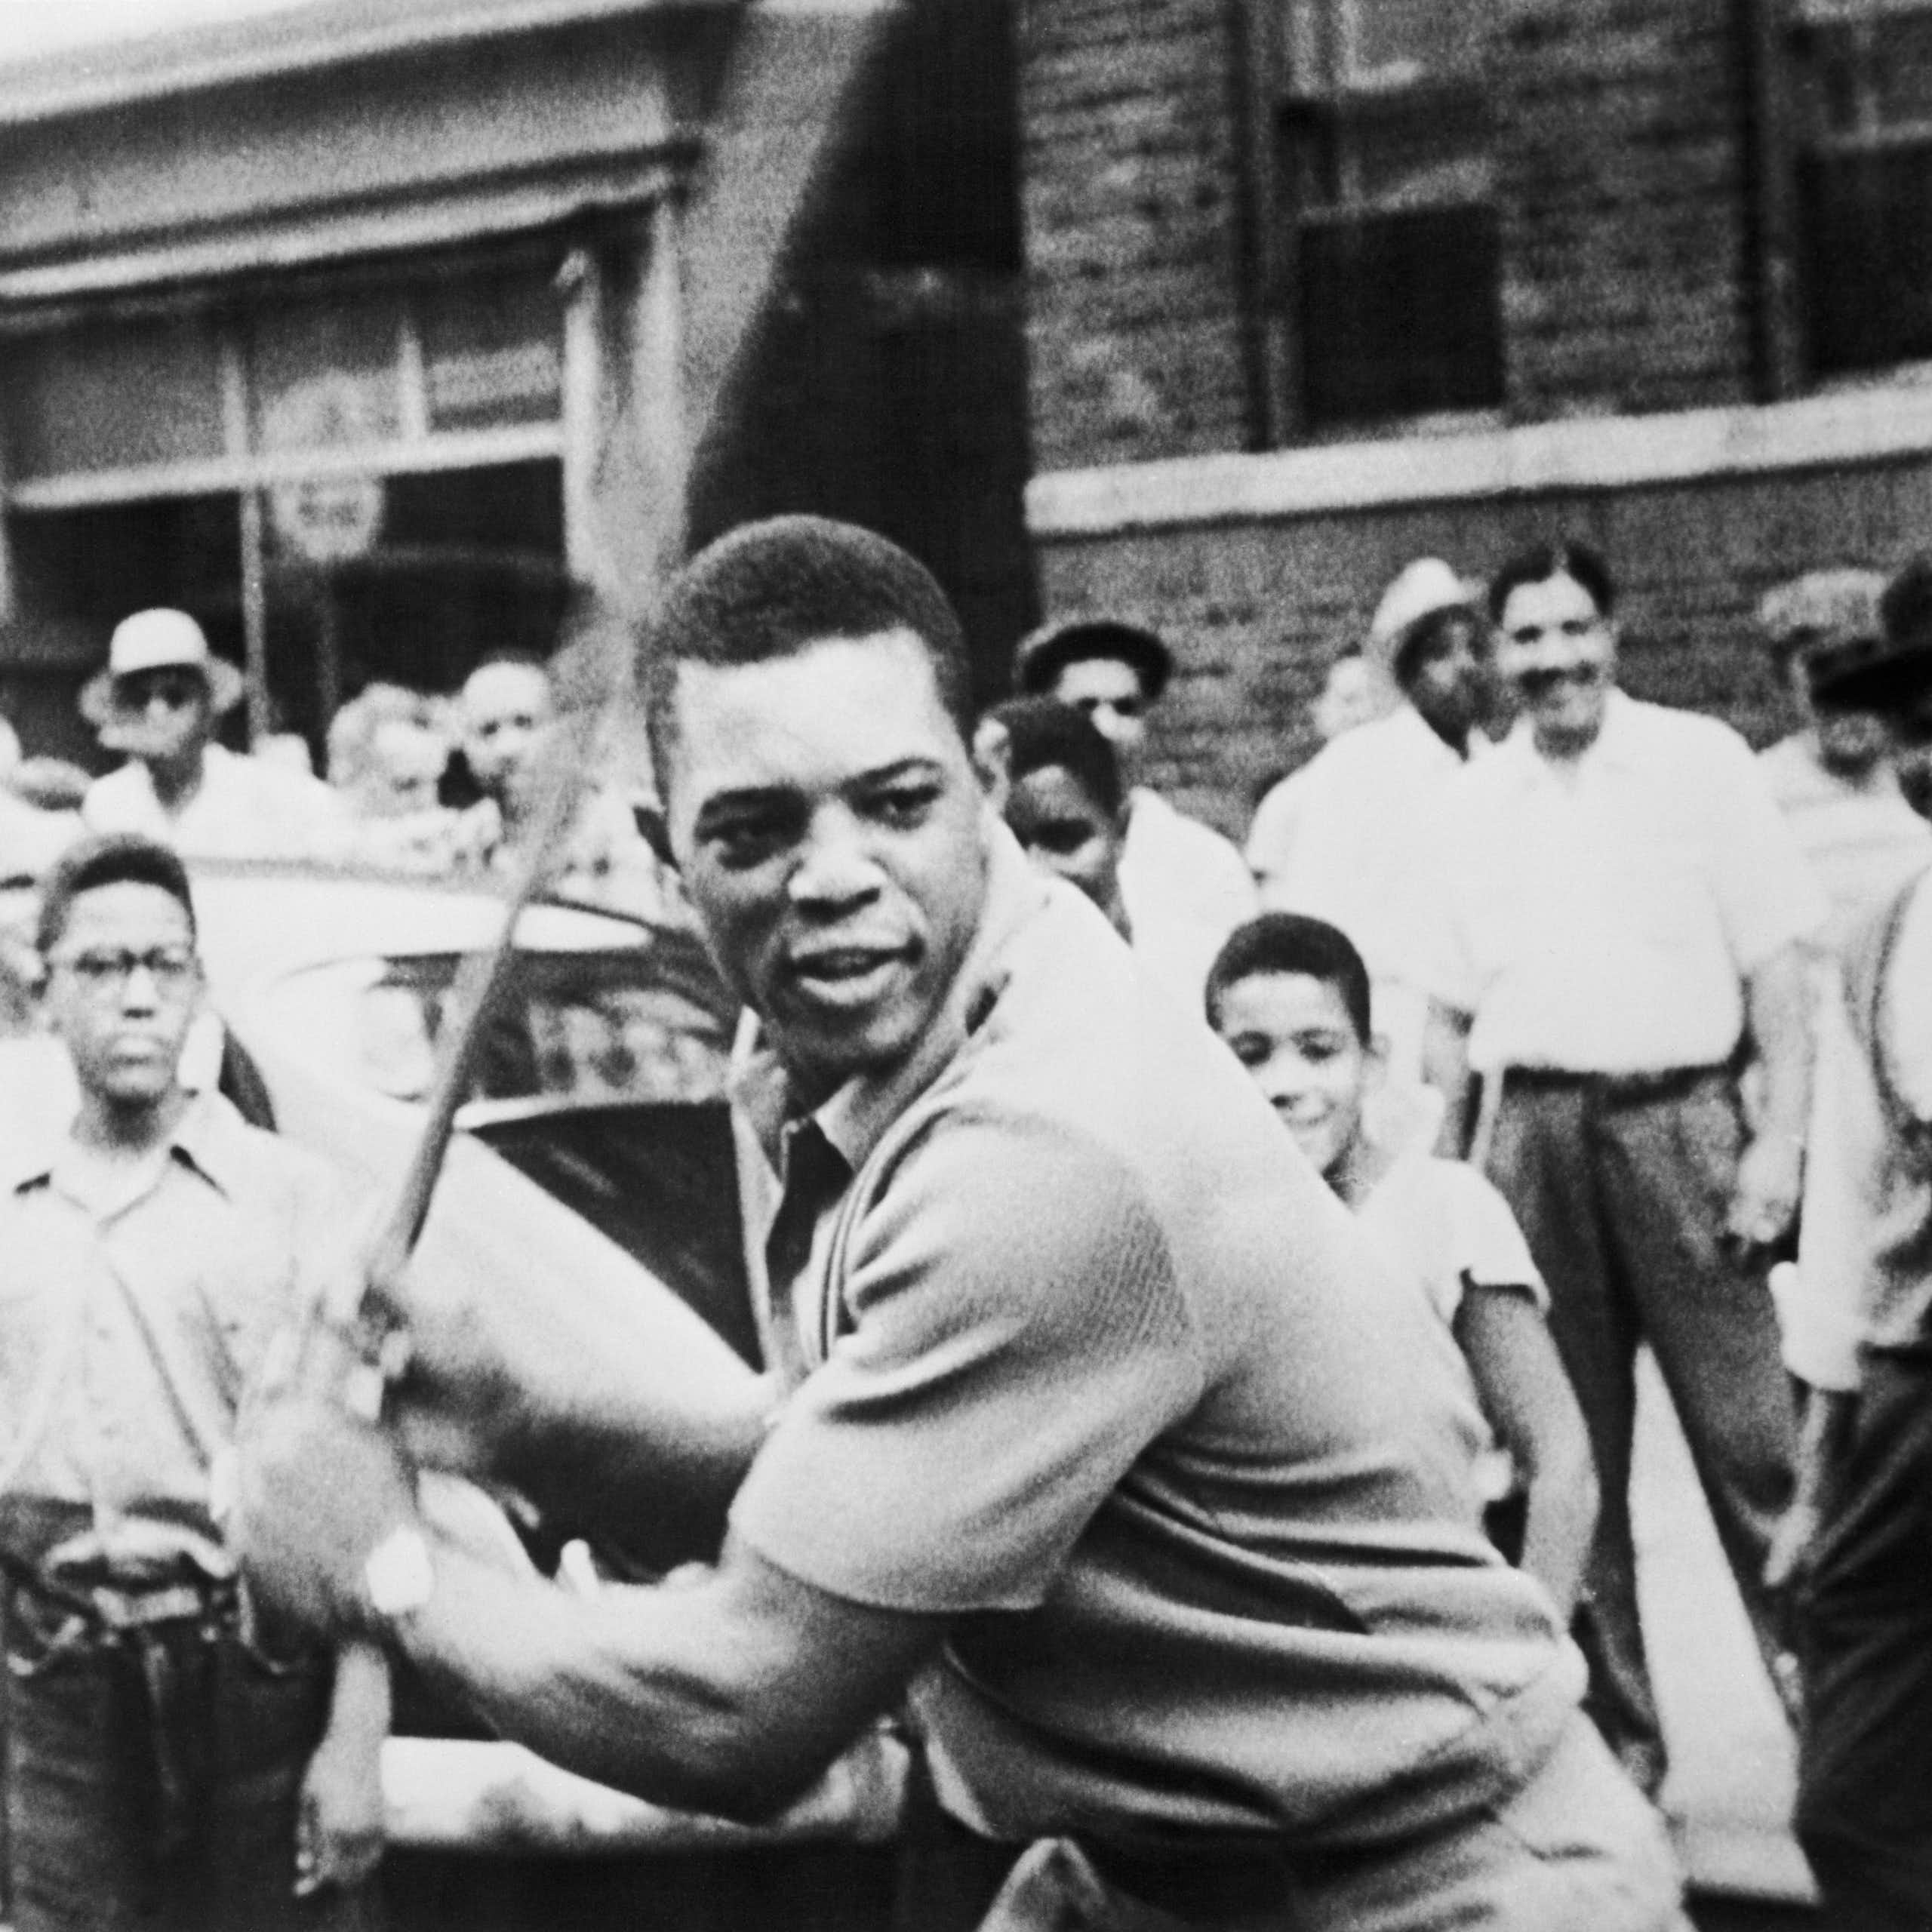 A Black man stands in front of a crowd with a baseball bat waiting for a pitch. 